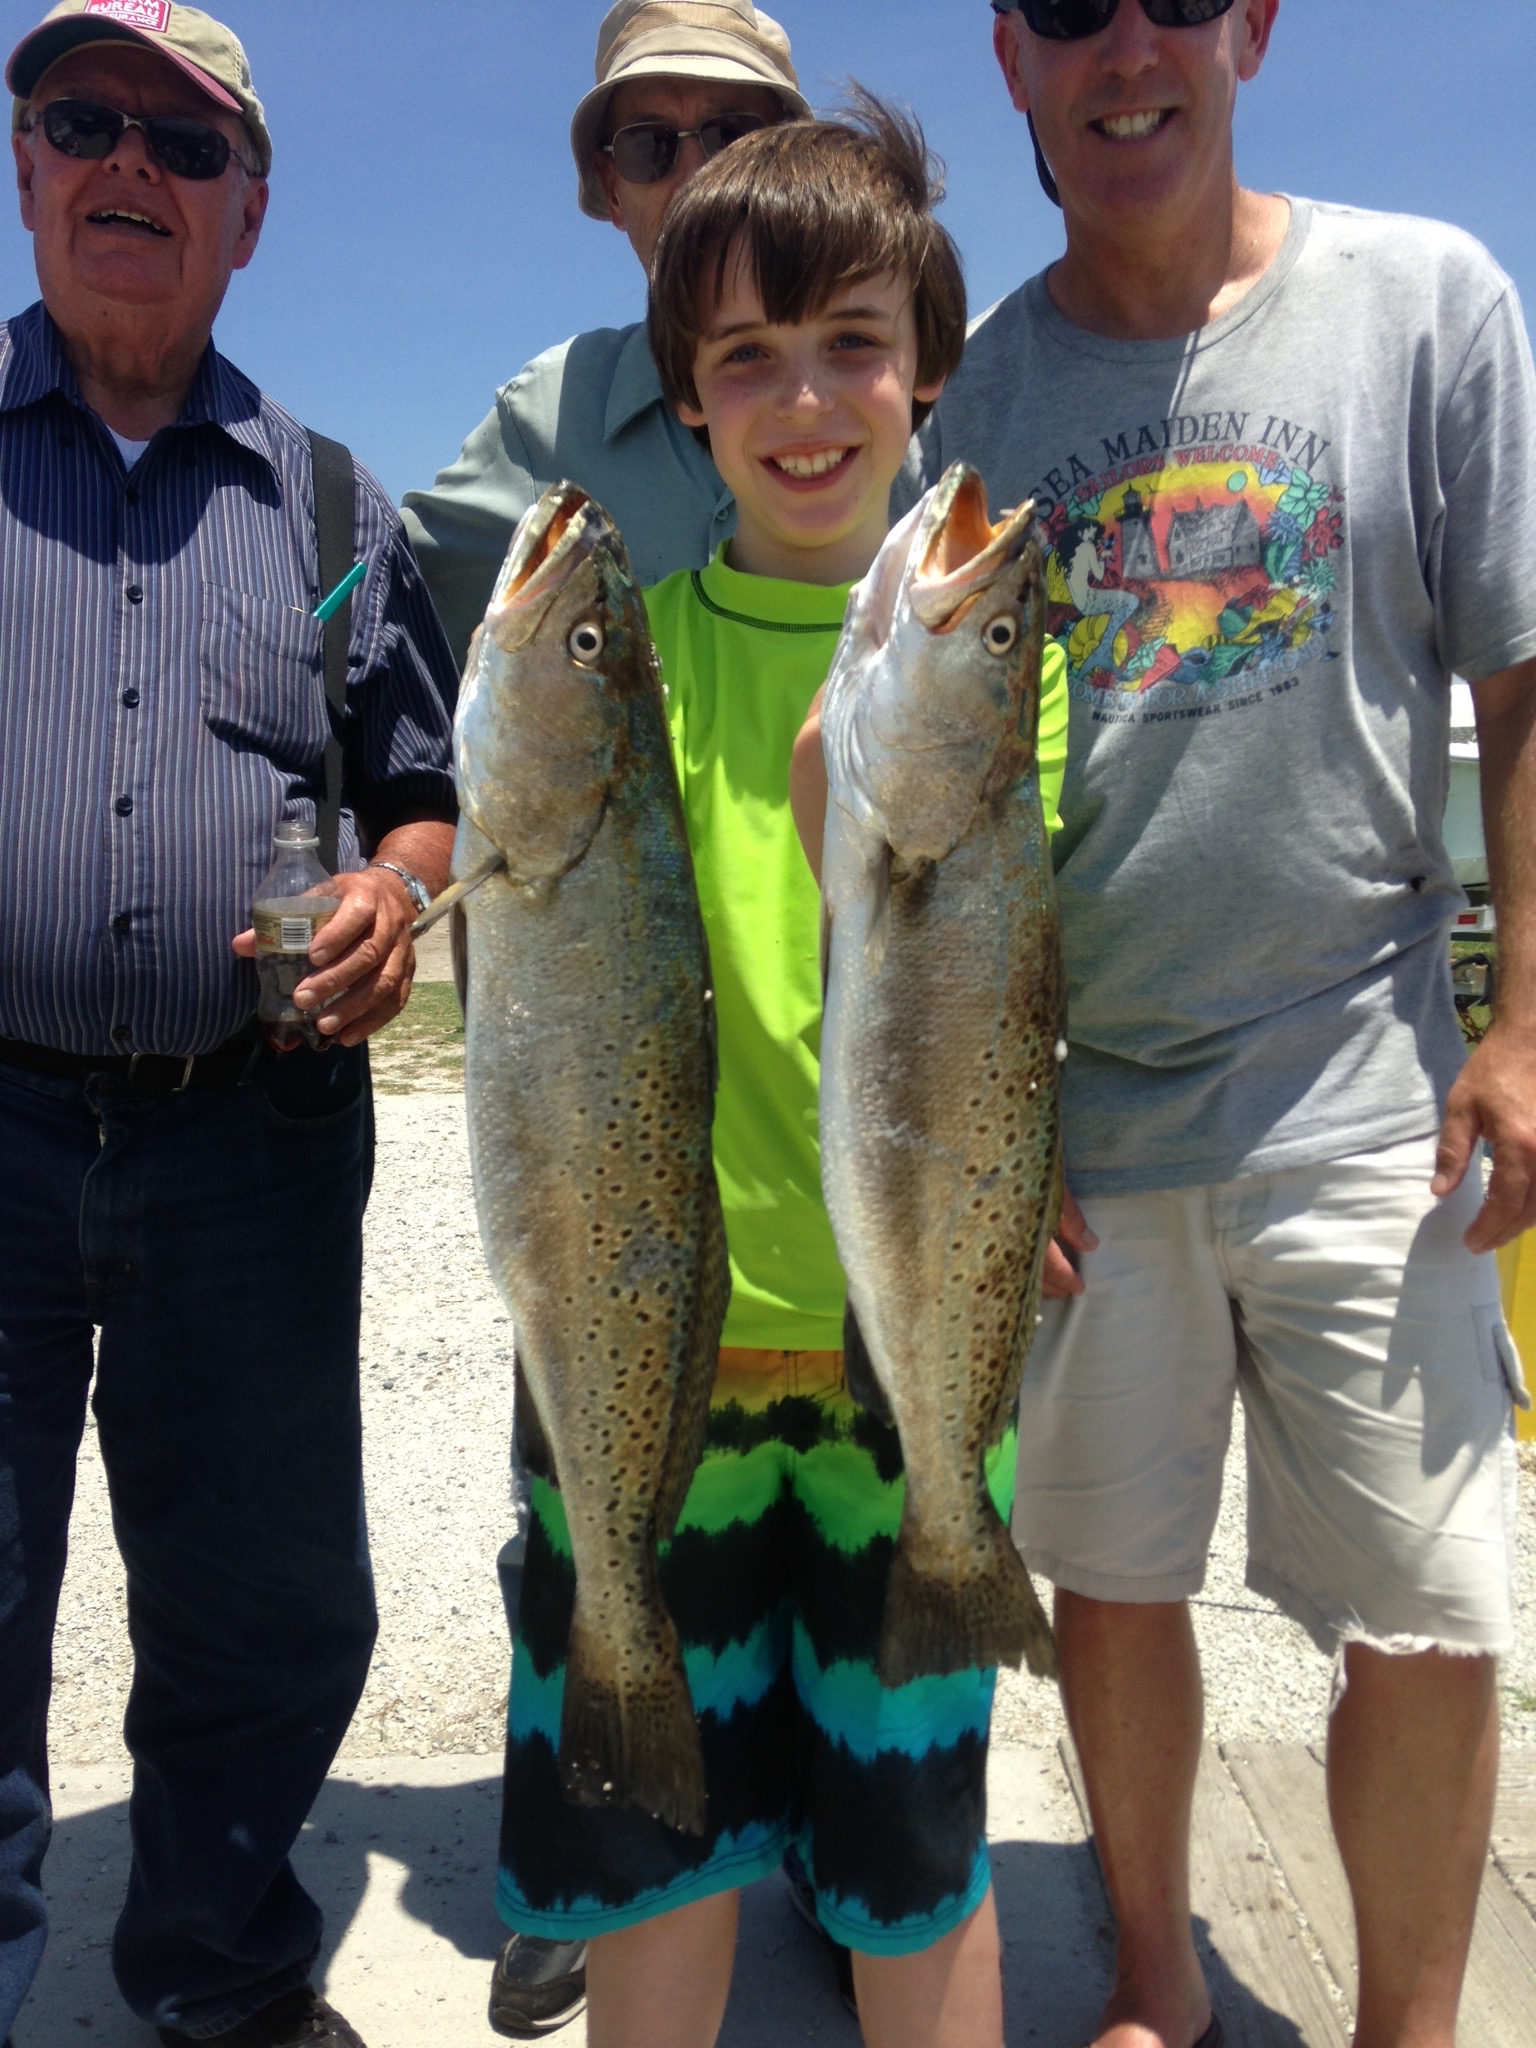 Wrightsville Beach waters full of hungry speckled trout